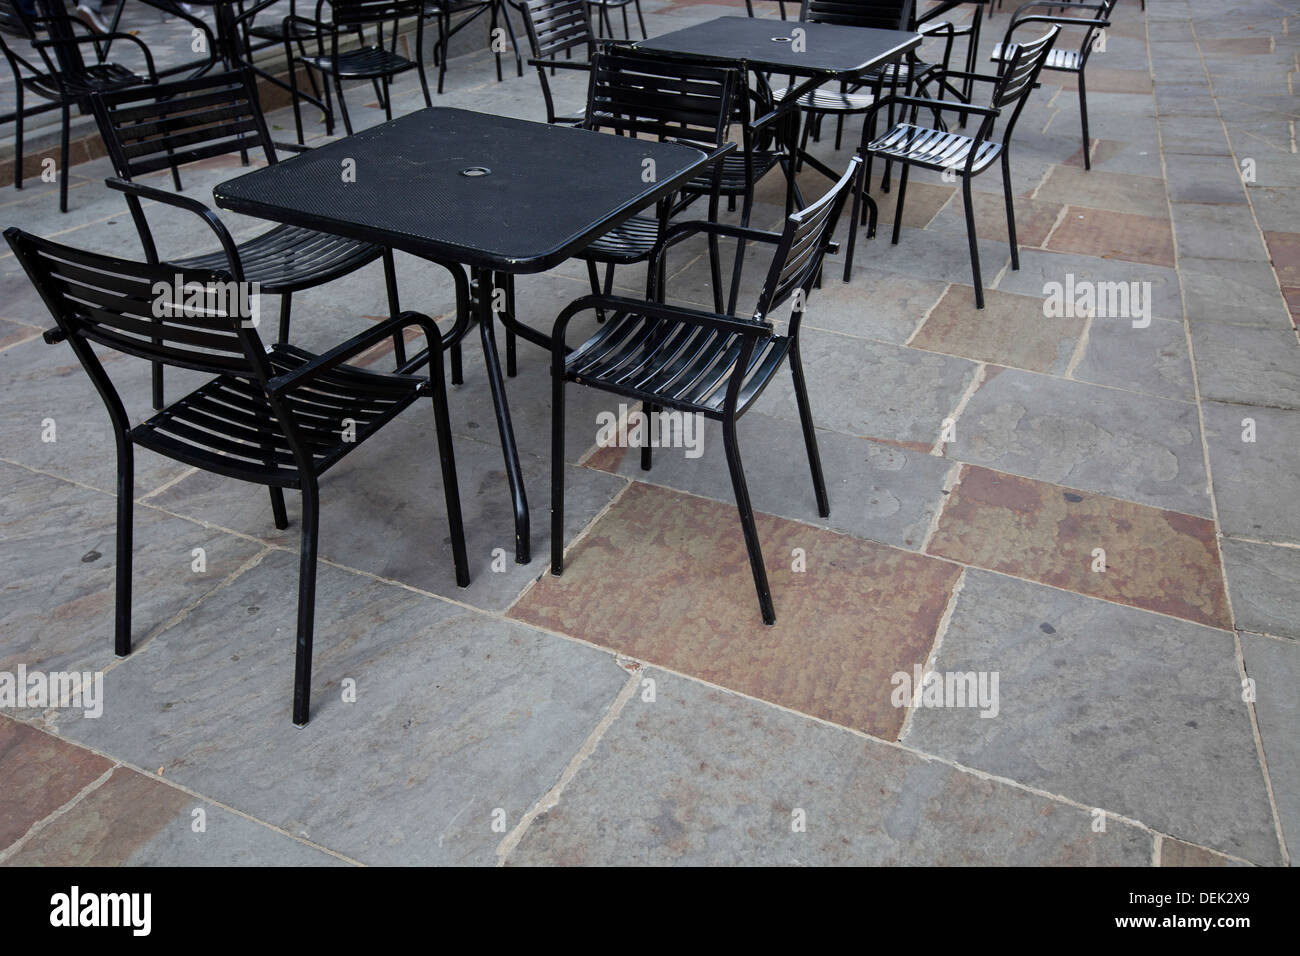 Tables chairs outdoor cafe Stock Photo